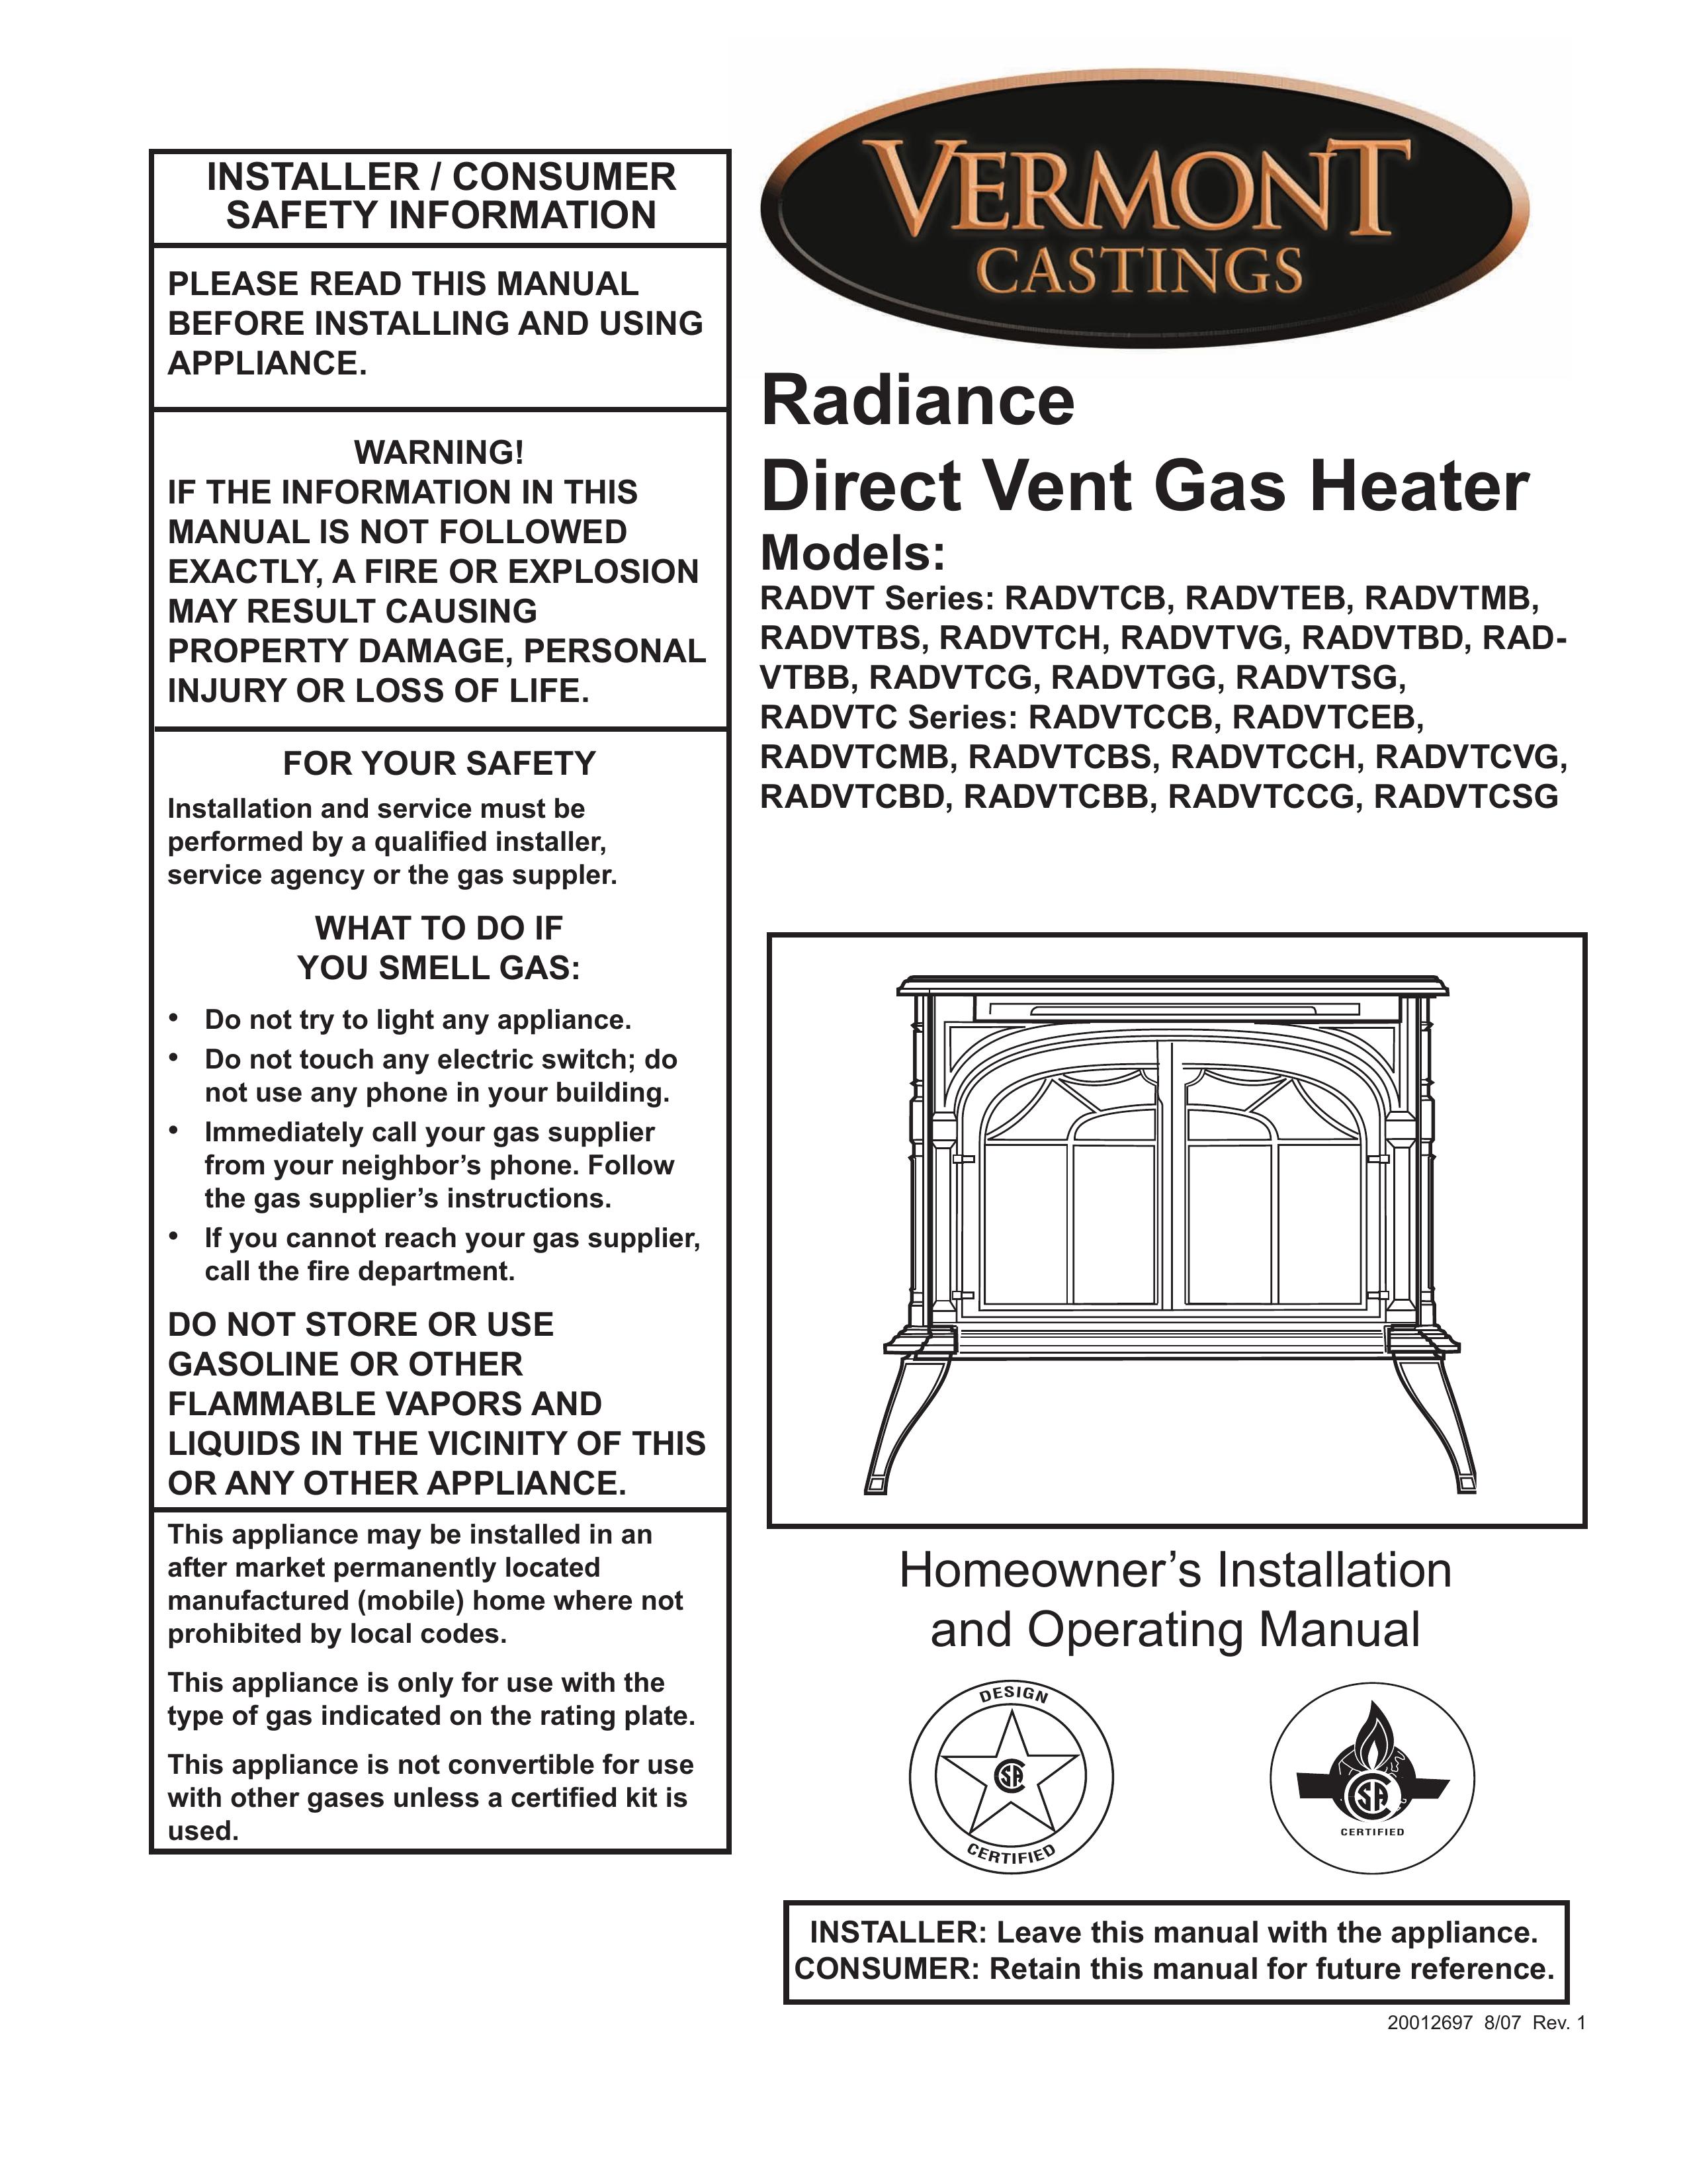 Vermont Casting RADVTCCH Outdoor Fireplace User Manual